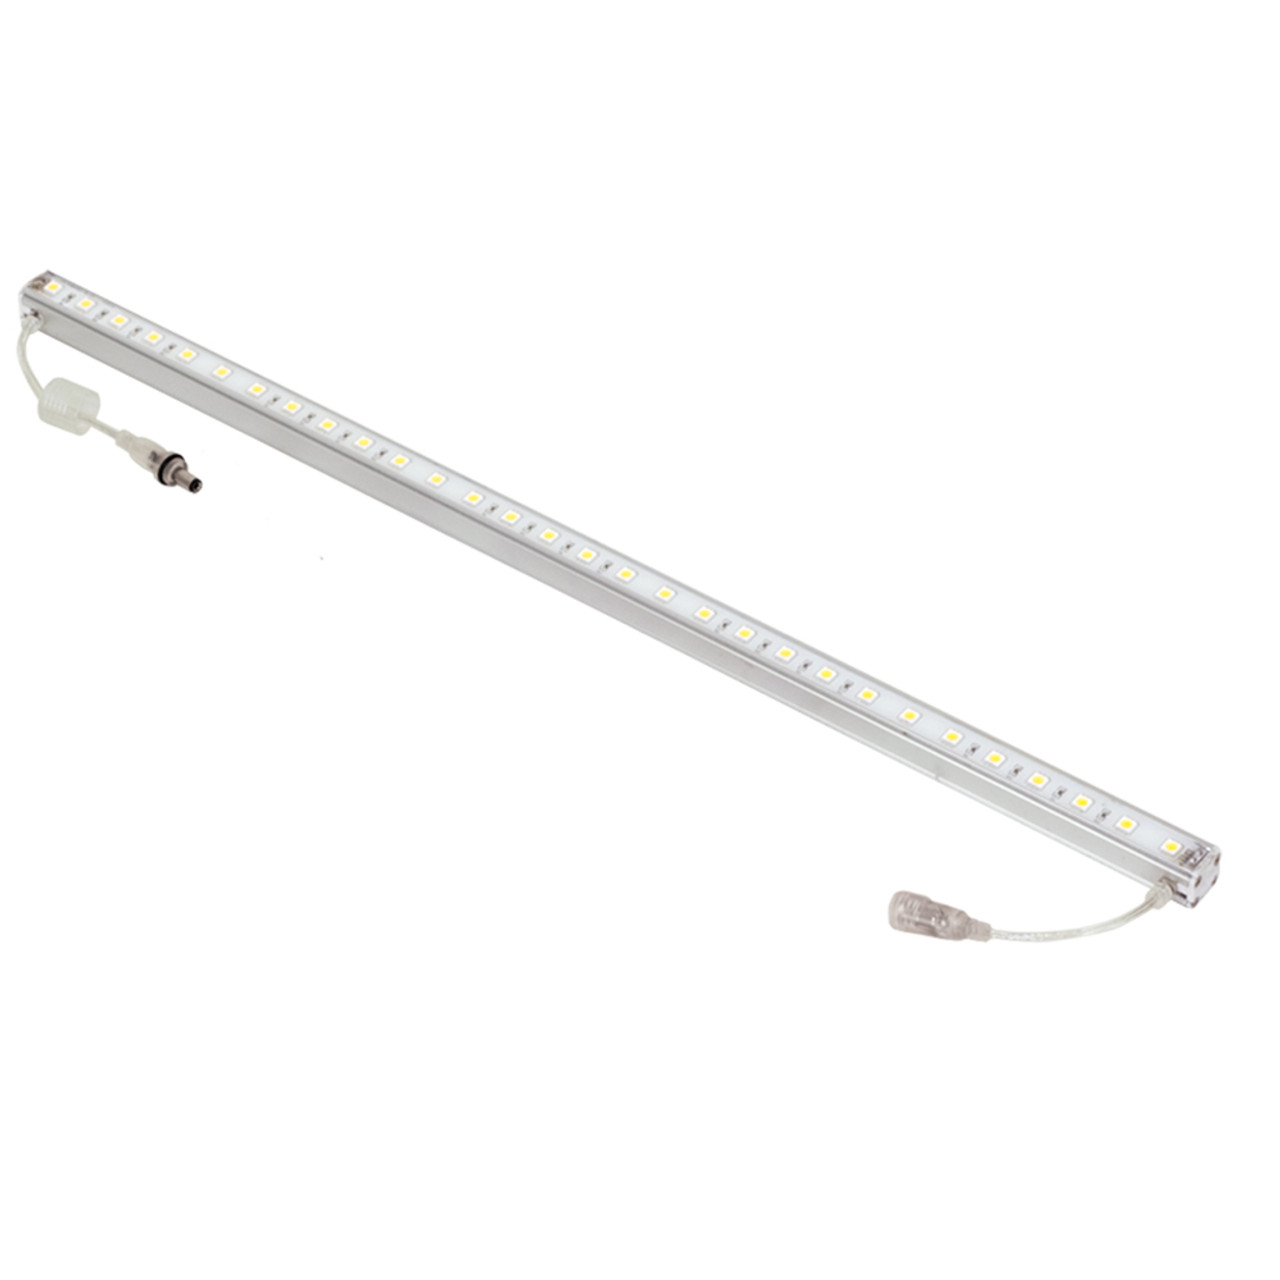 JESCO Lighting DL-RS-24-R 7.6W Dimmable linear LED fixture for wet,damp and dry locations. Aluminium extruded housing. , Red